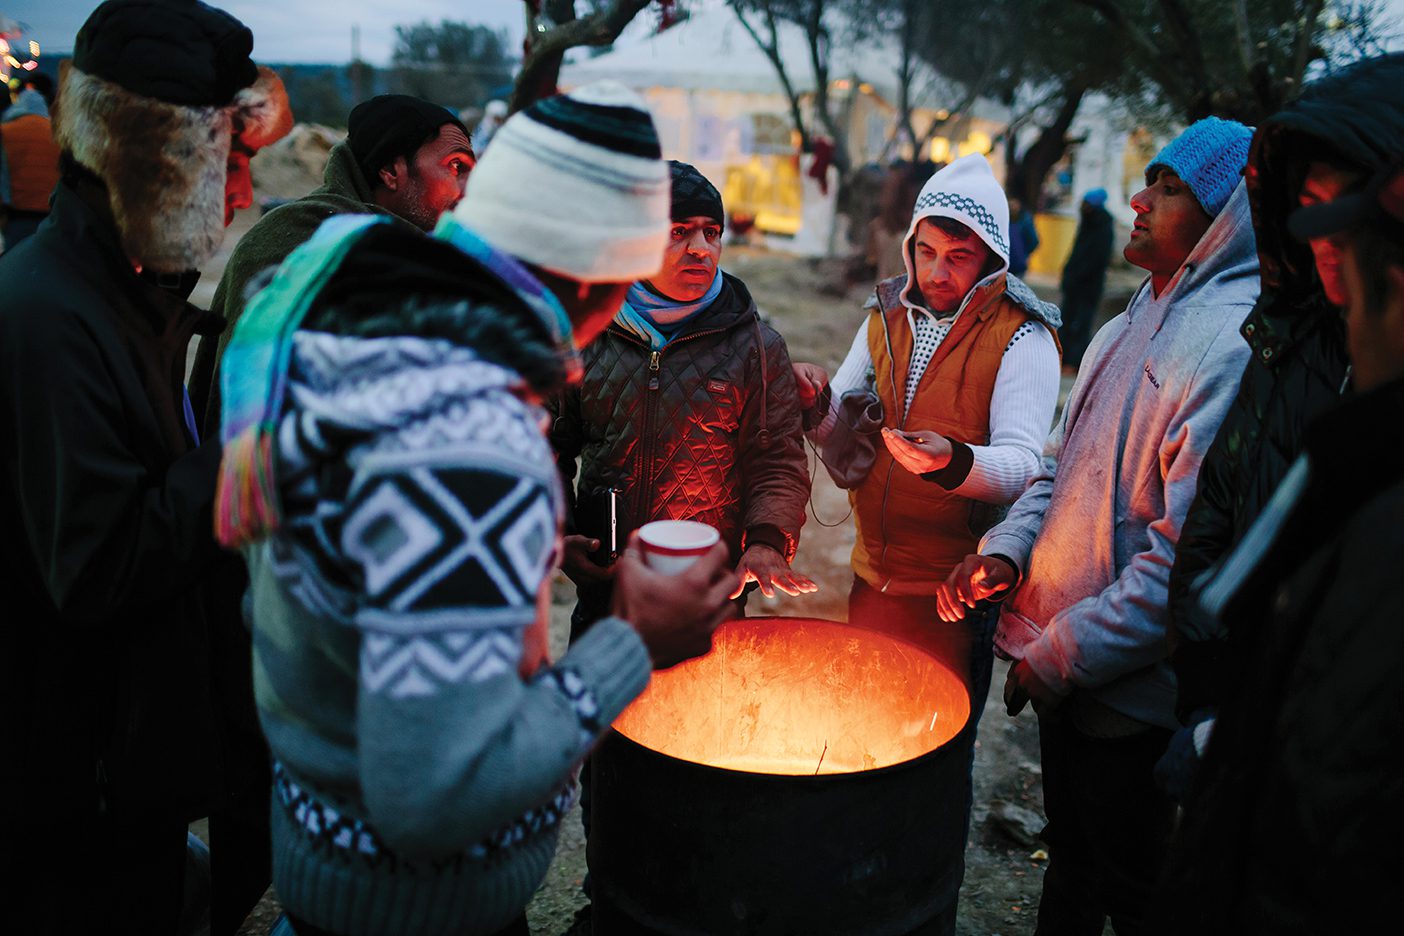 A group of refugees huddle around a fire in a metal trash can.